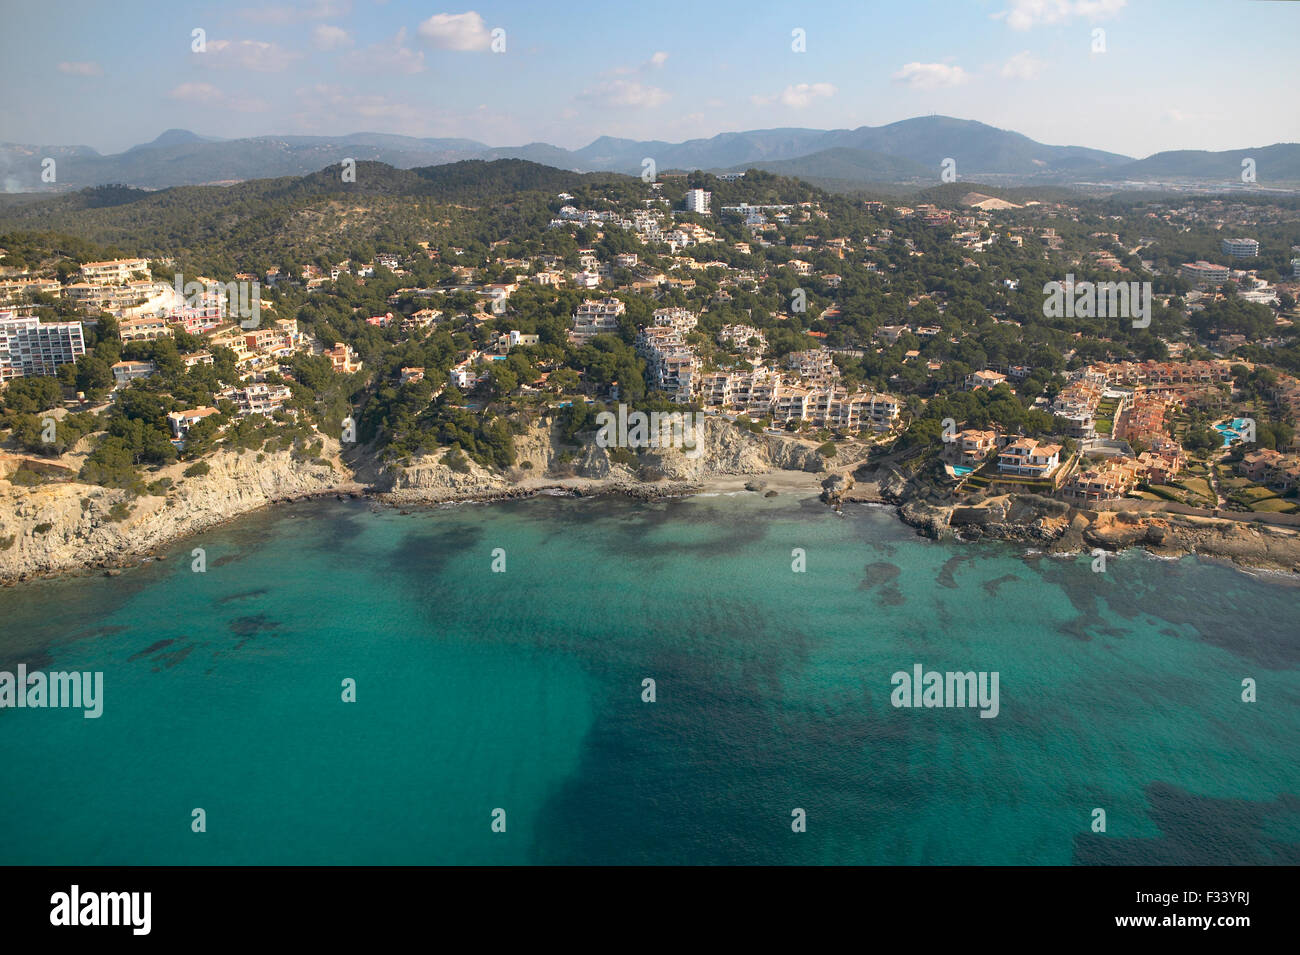 Areal view of residential zone in the island of Mallorca Stock Photo